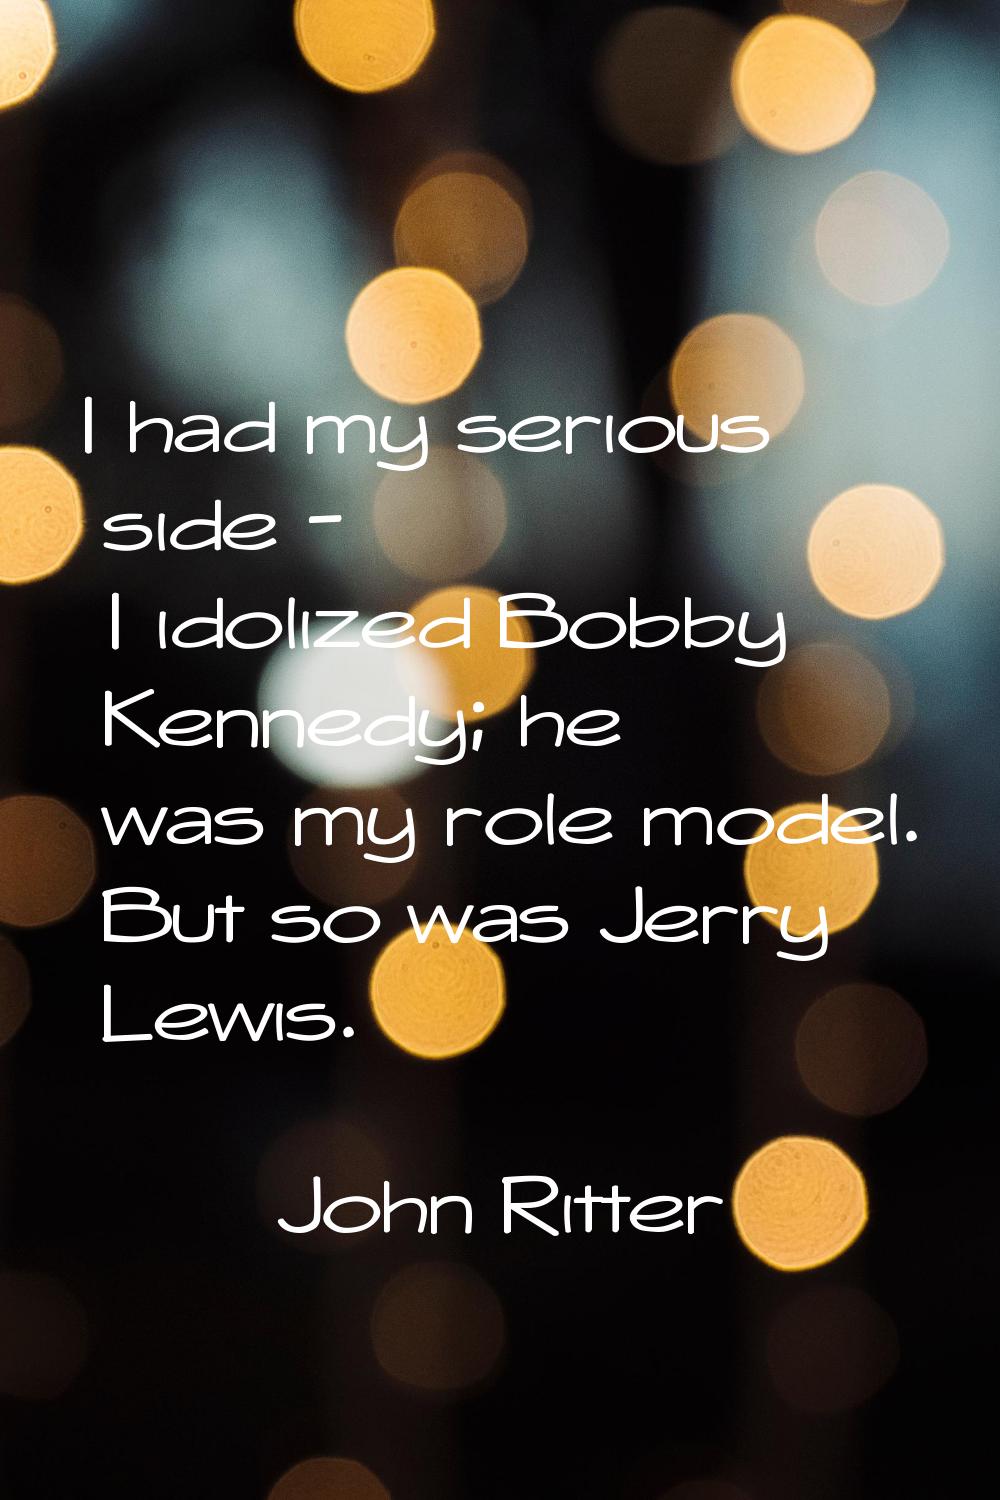 I had my serious side - I idolized Bobby Kennedy; he was my role model. But so was Jerry Lewis.